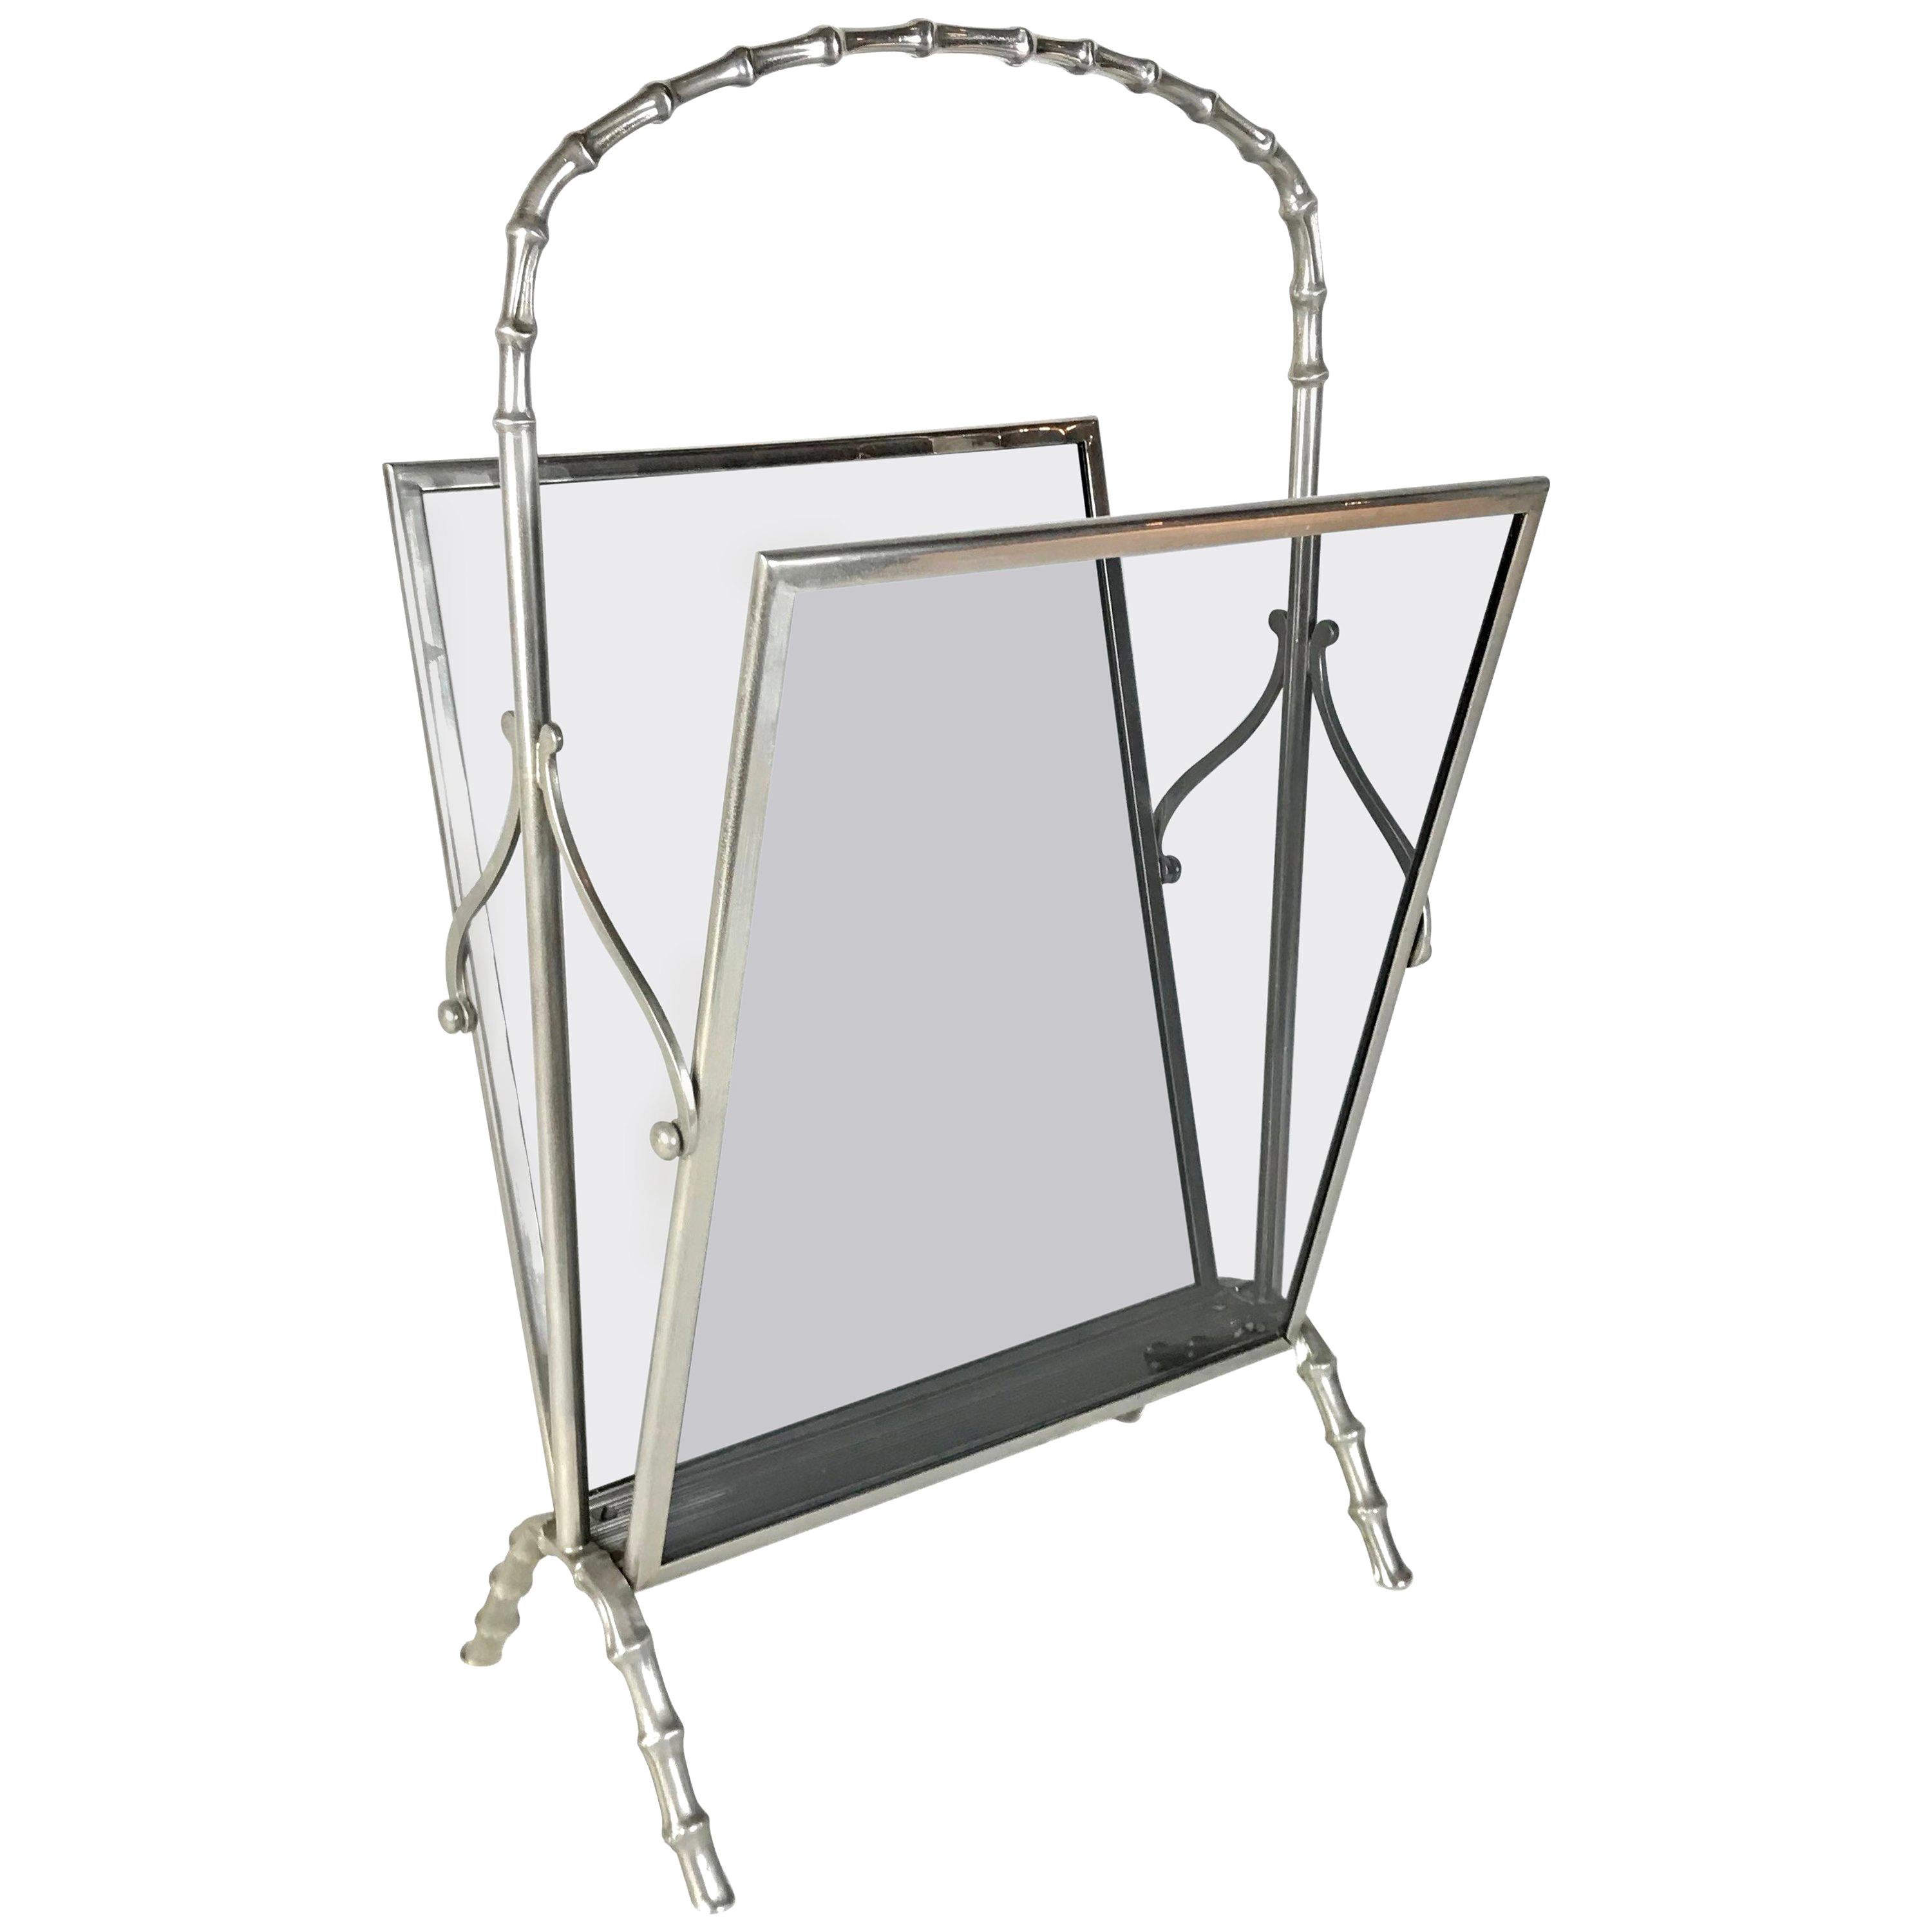 Midcentury Maison Baguès Silvered Brass Faux Bamboo Magazine Rack, 1960s, France For Sale